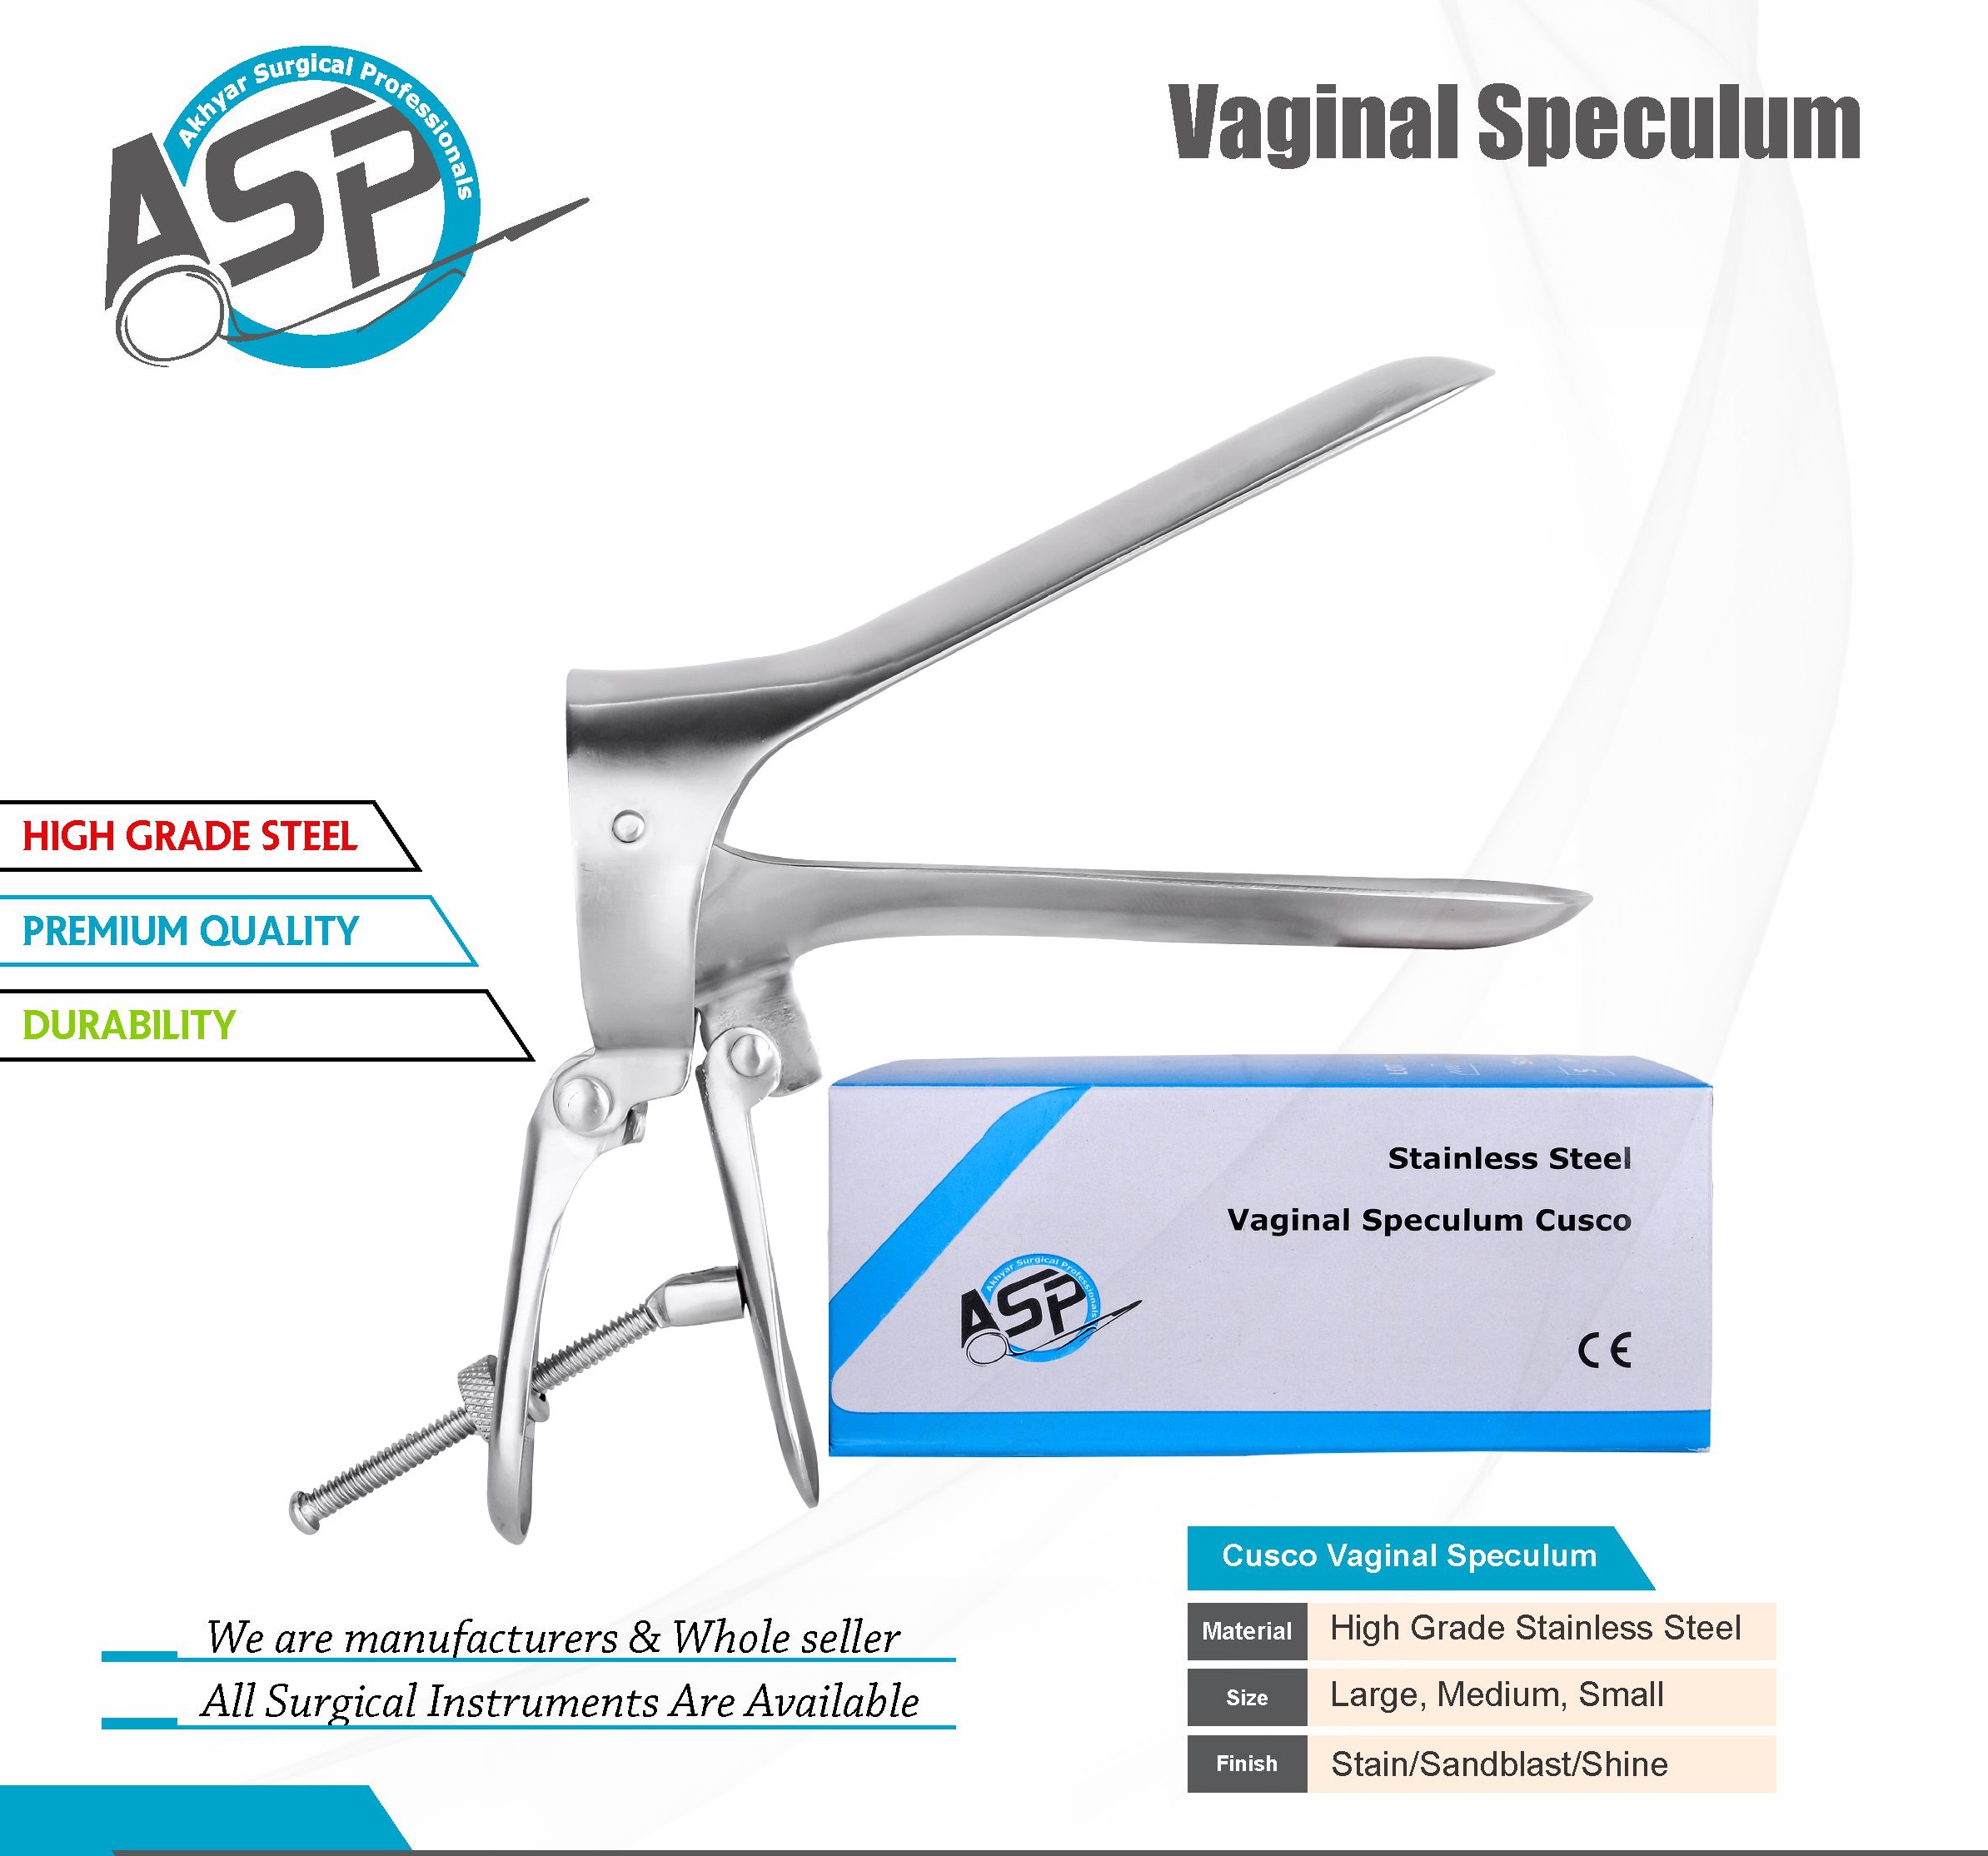 Cusco Vaginal Speculum from Akhyar Surgical Professionals